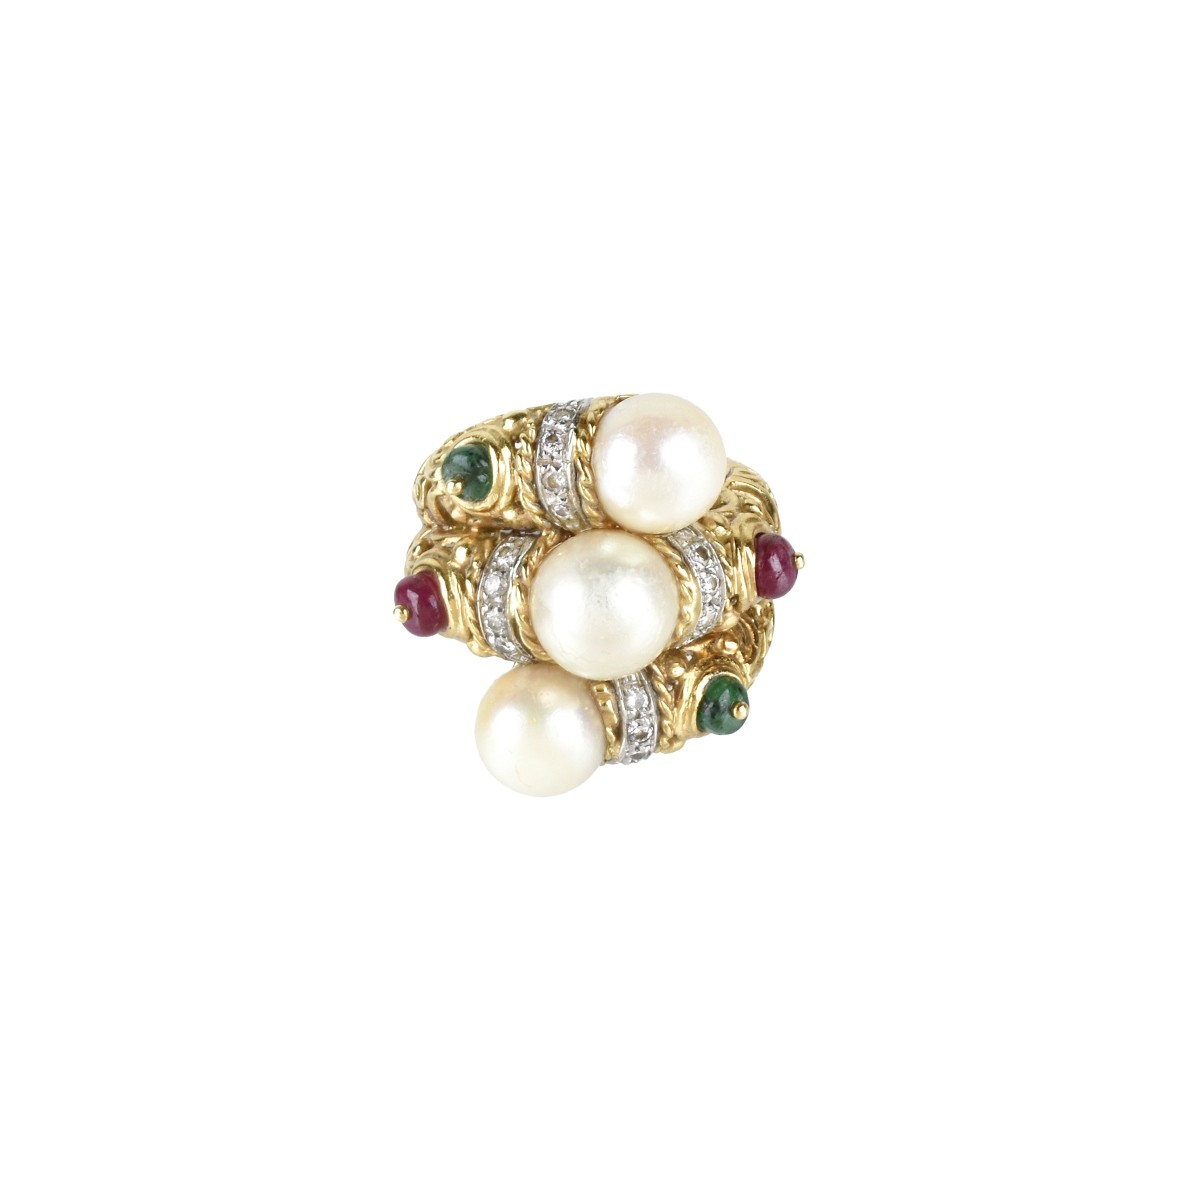 Gemstone, Pearl and 18K Ring